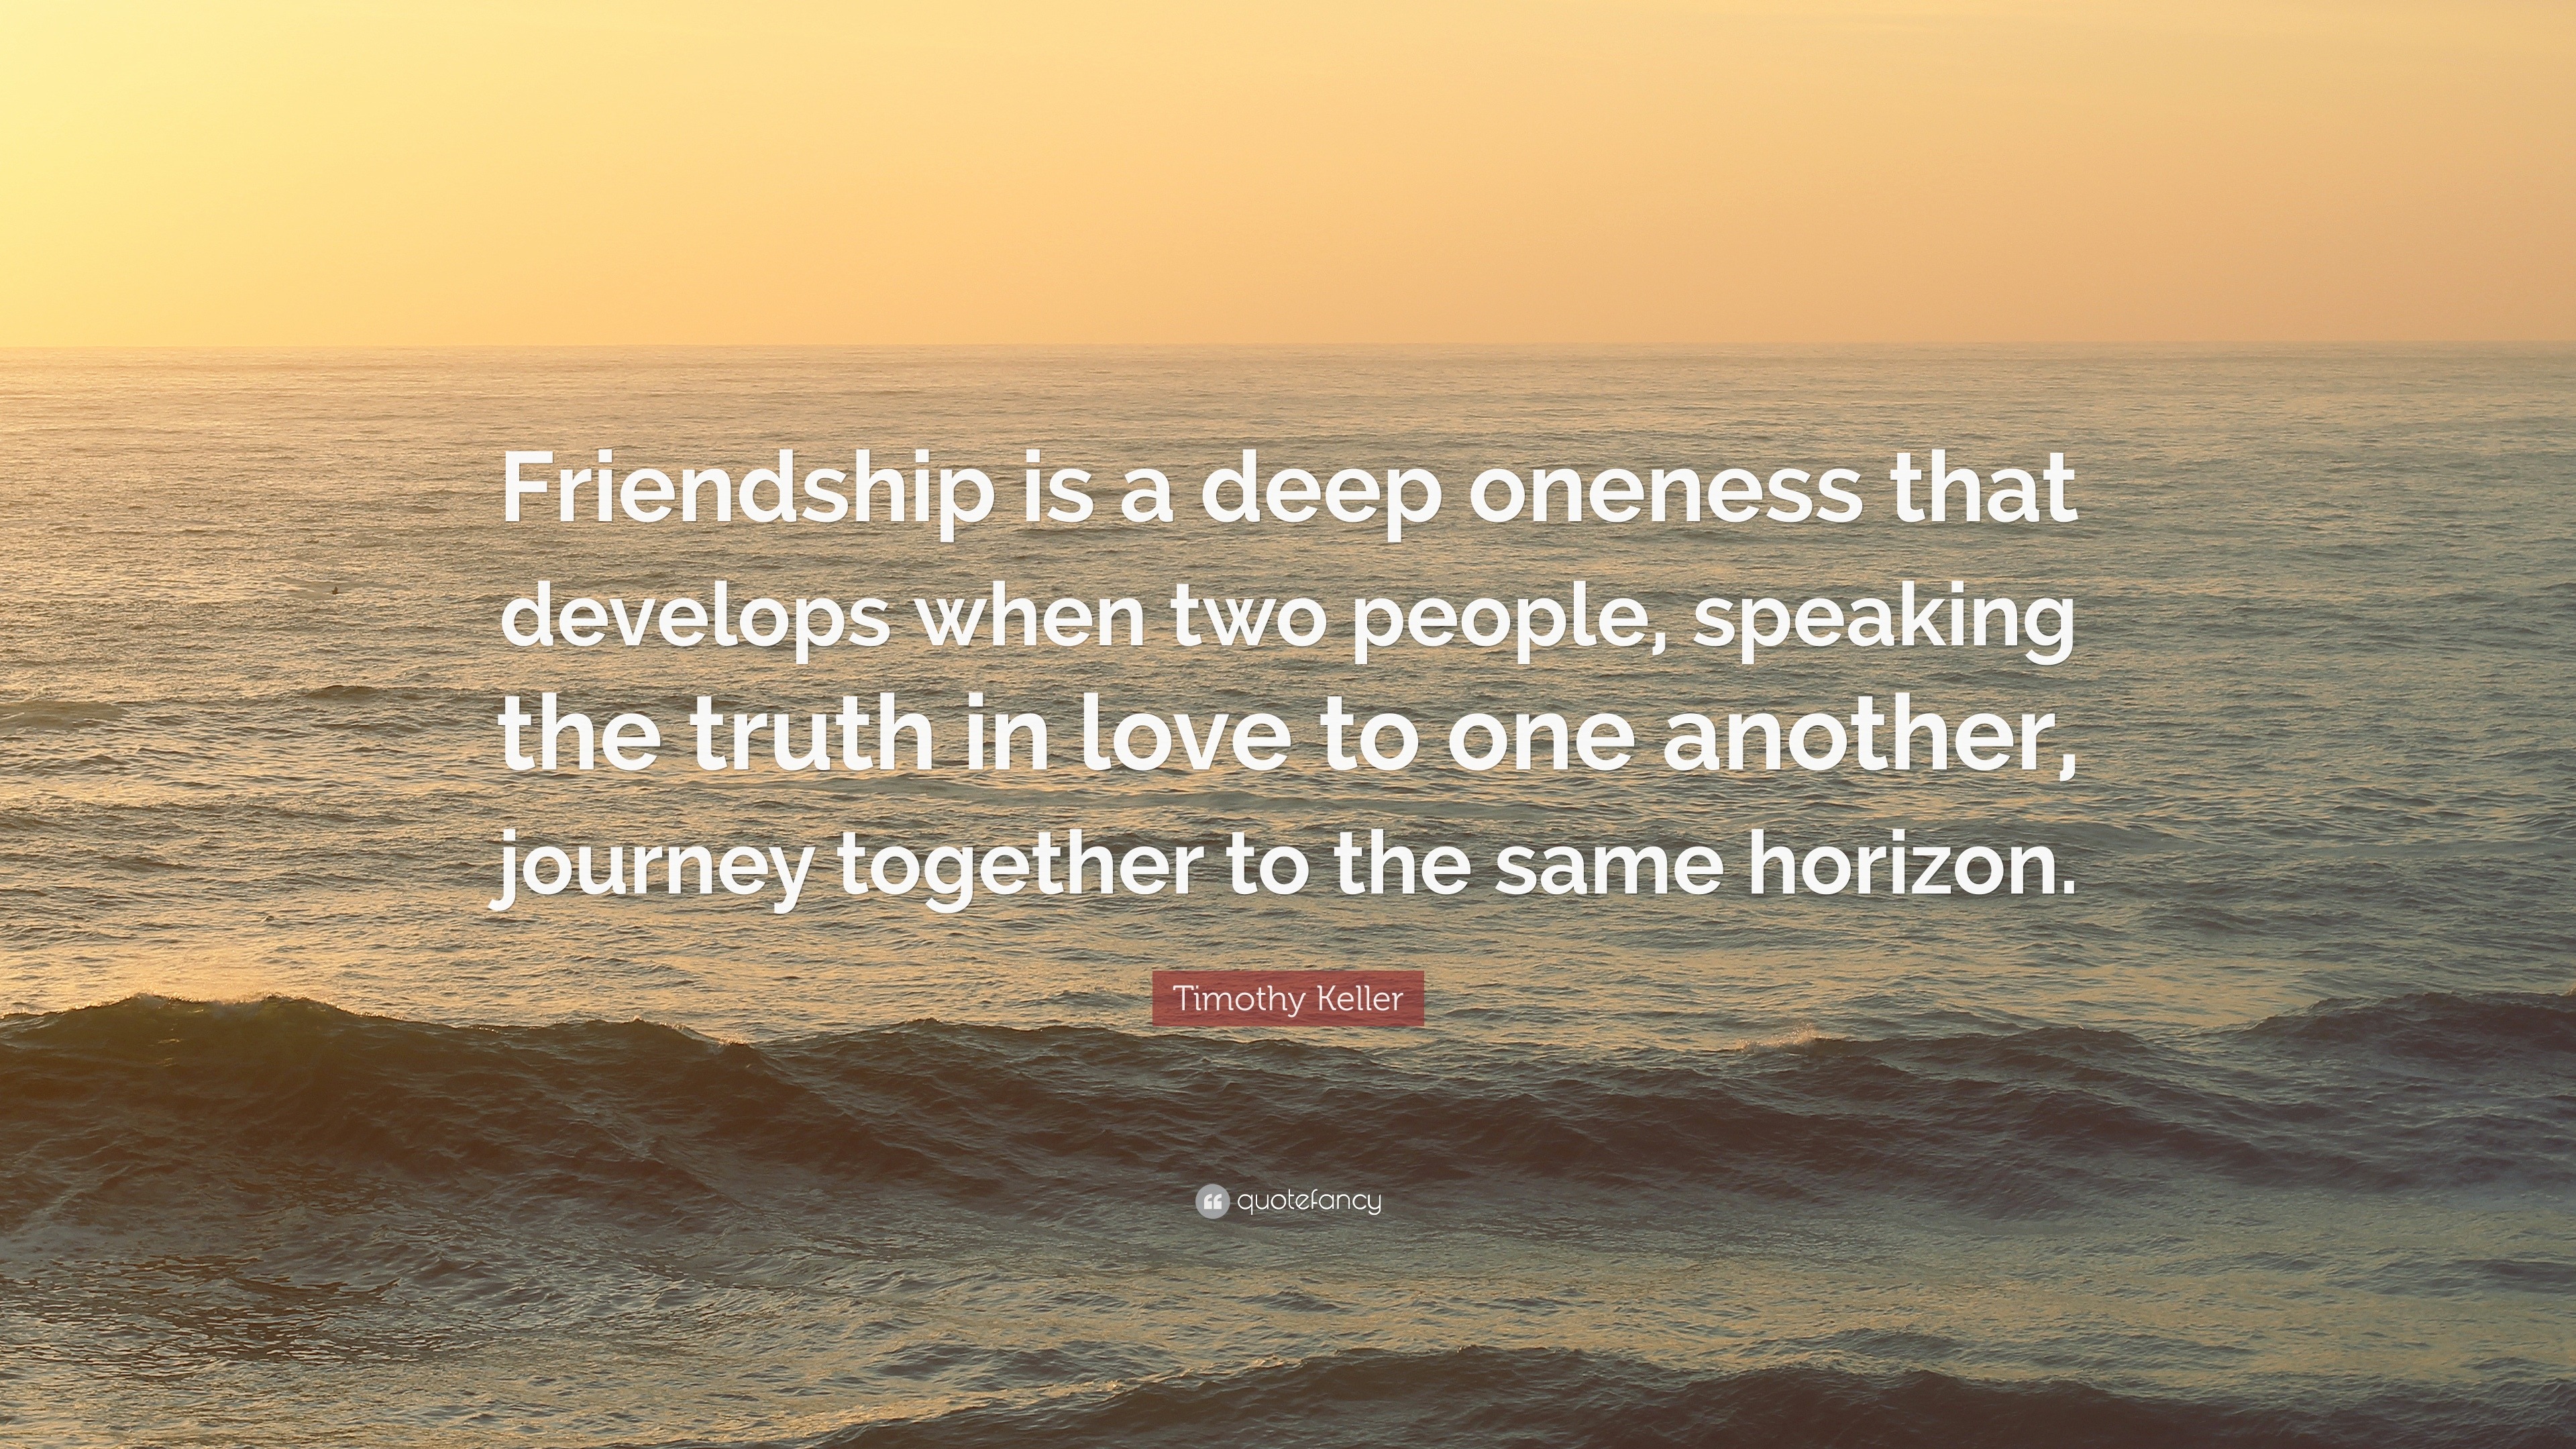 Timothy Keller Quote “Friendship is a deep oneness that